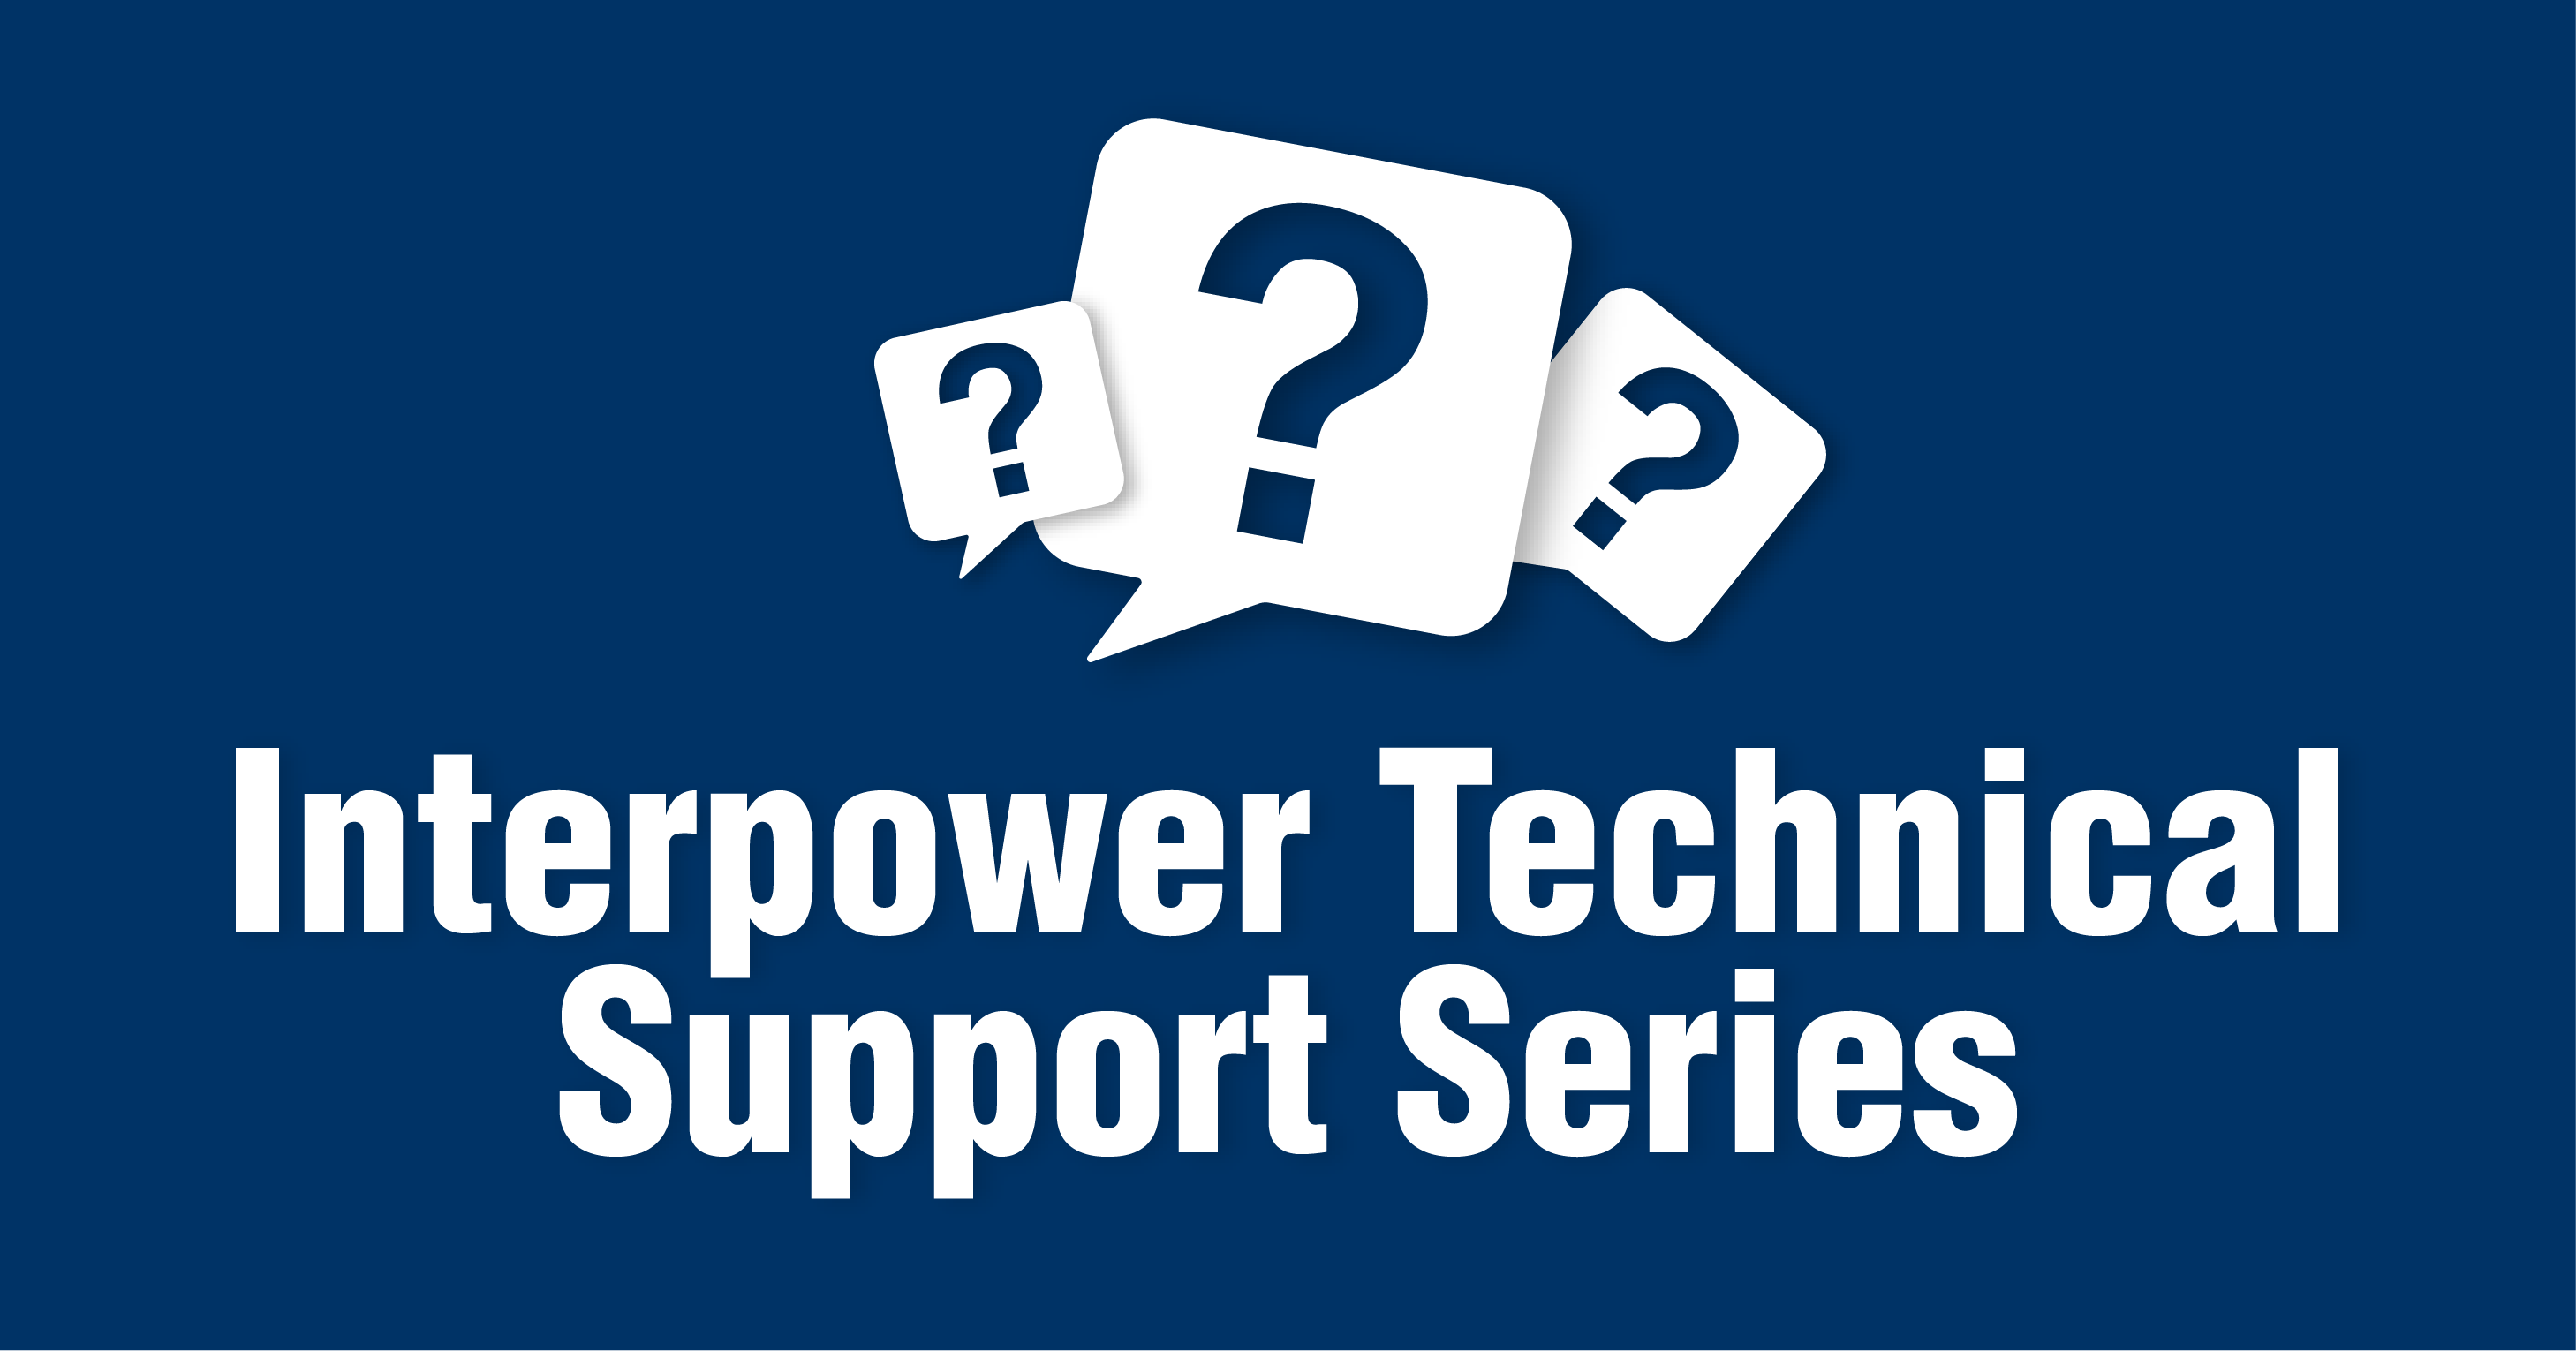 Interpower technical support series